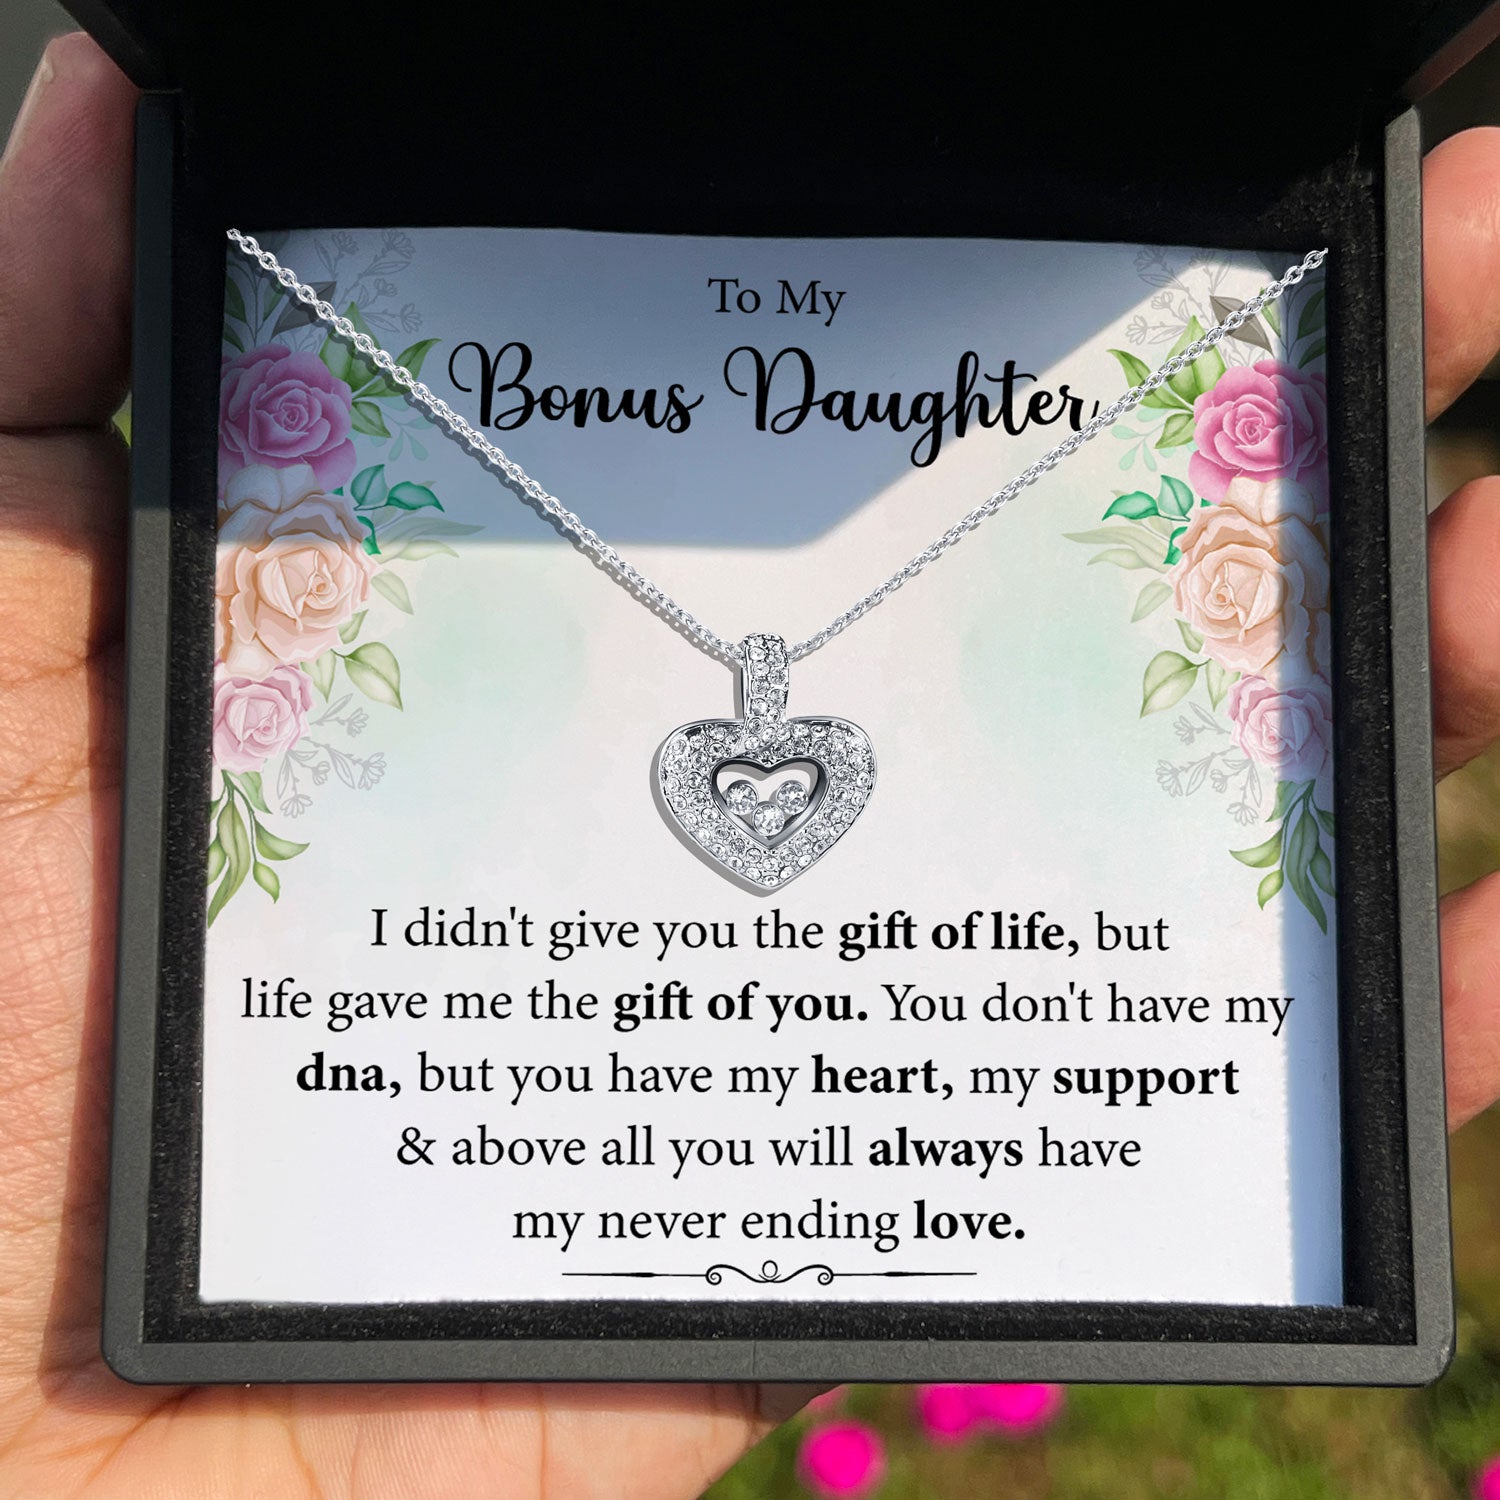 To My Bonus Daughter - You Have My Heart. Support - Tryndi Floating Heart Necklace